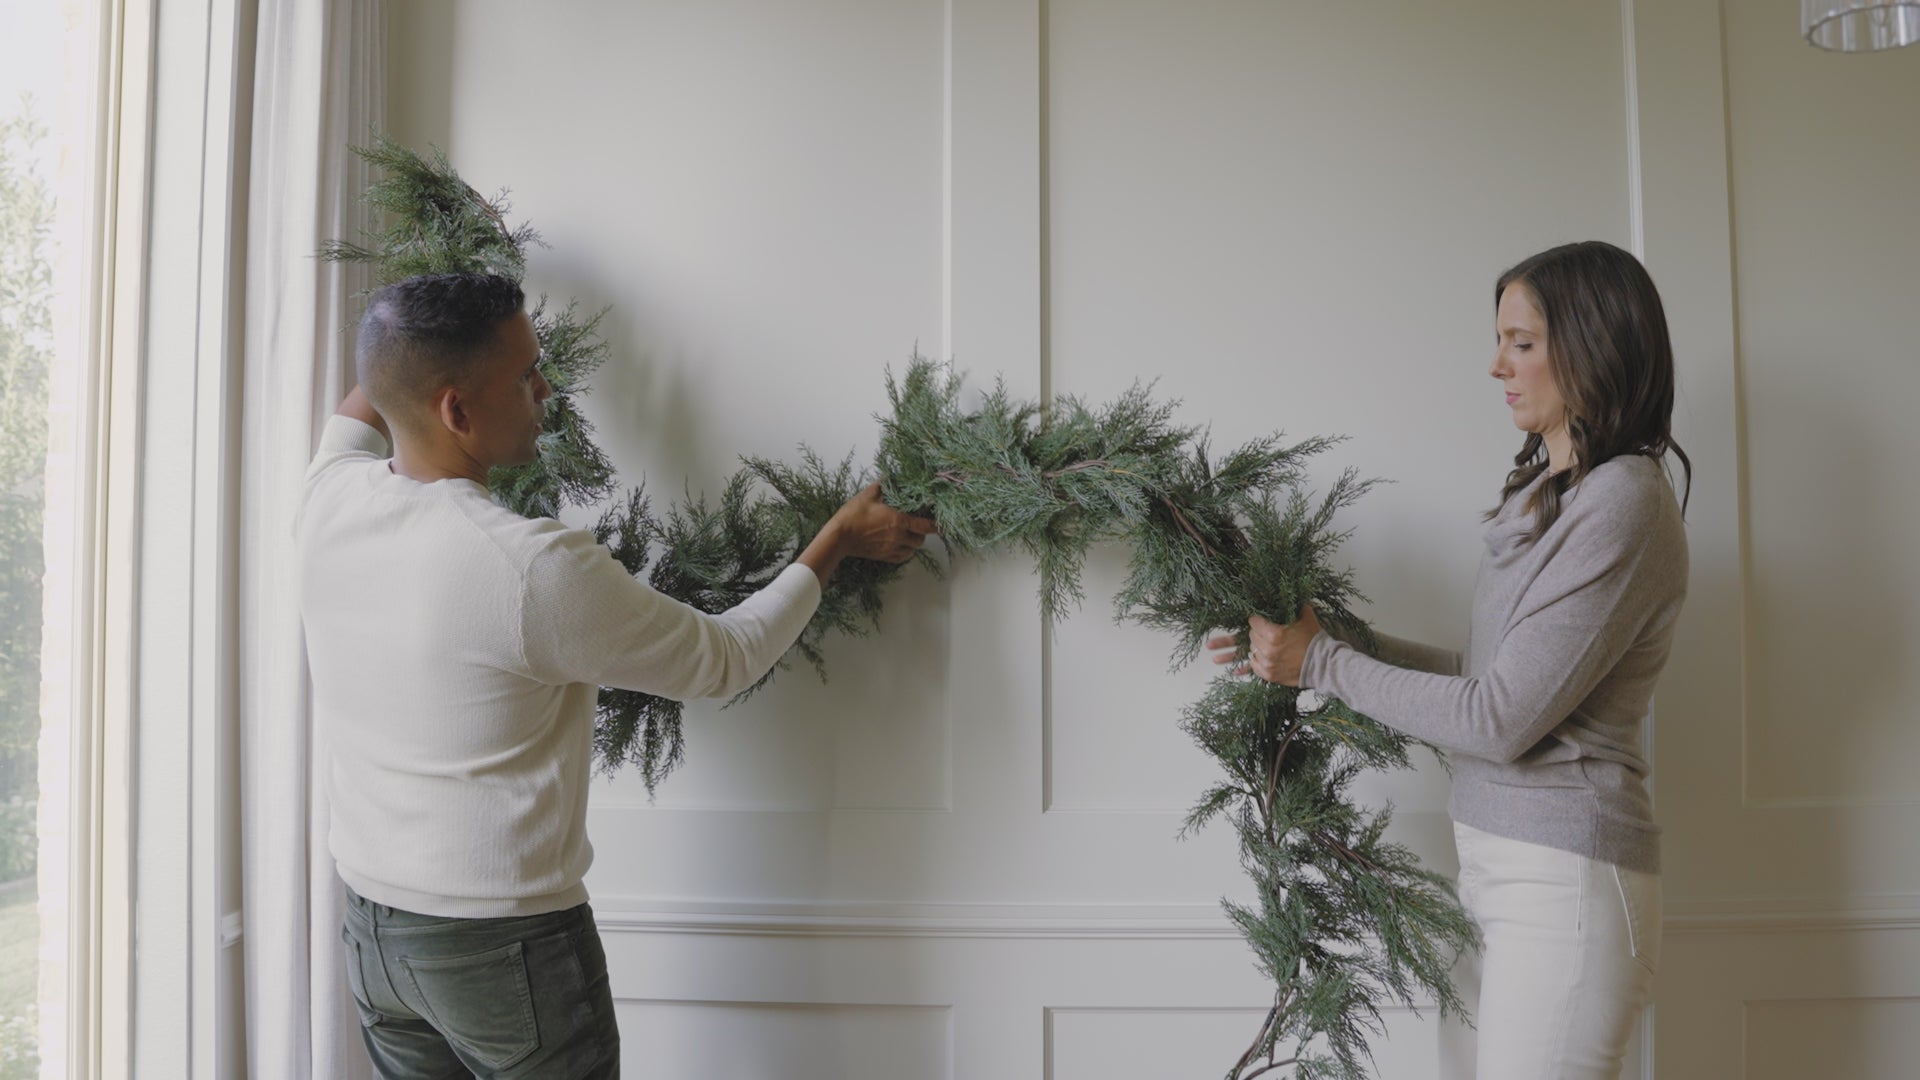 Wreath and garland video